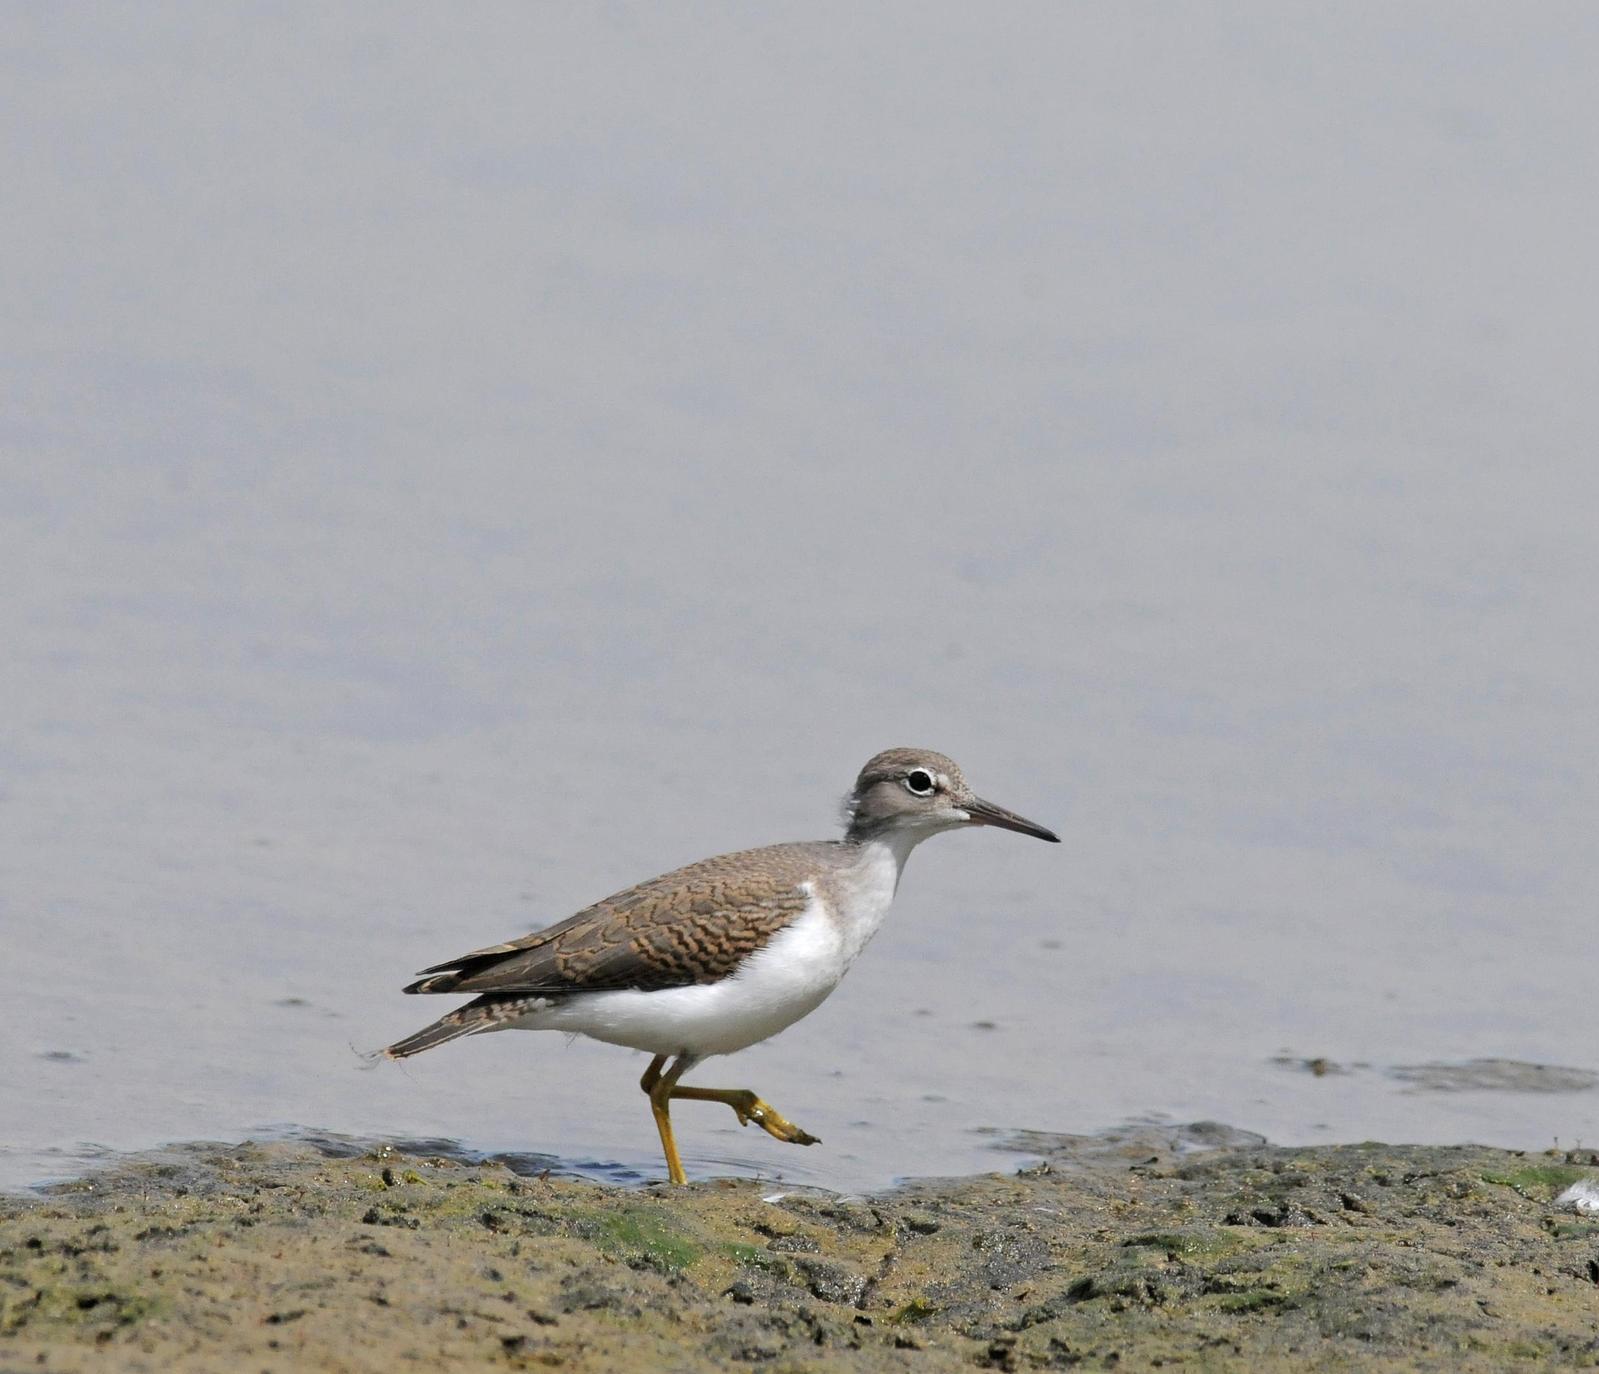 Spotted Sandpiper Photo by Steven Mlodinow